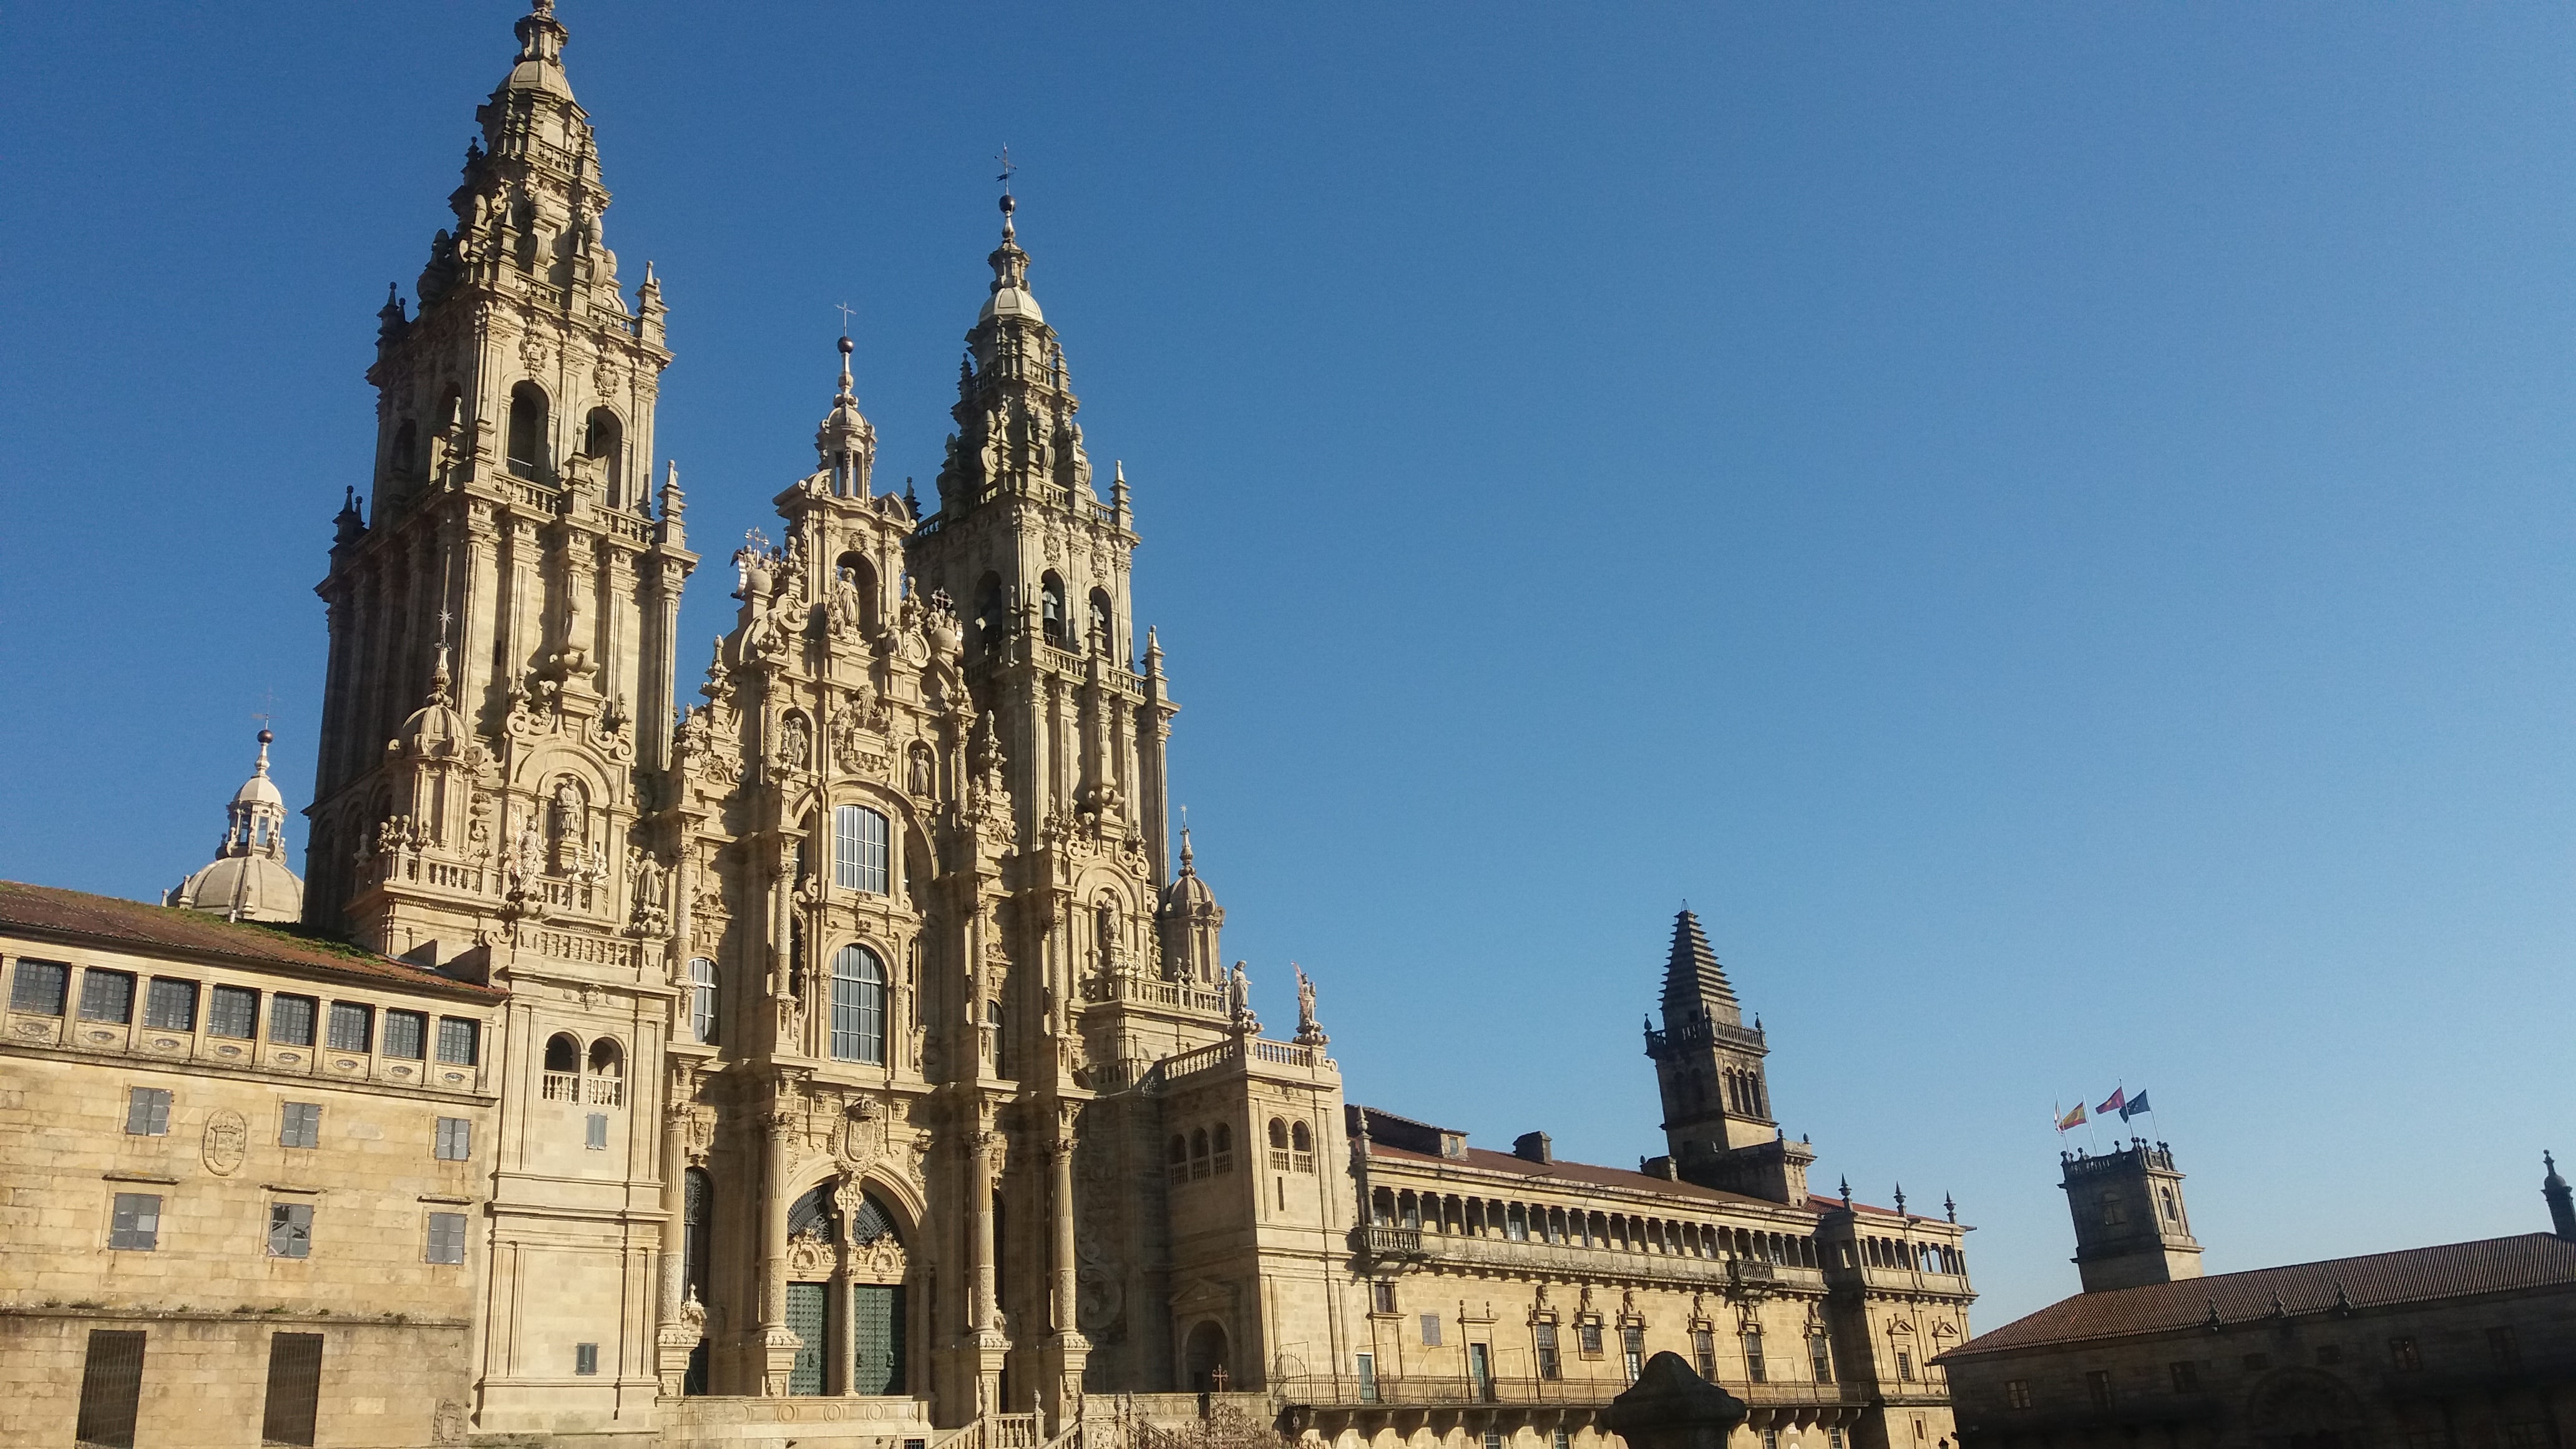 Spanish steps: the ups and downs of the Camino de Santiago